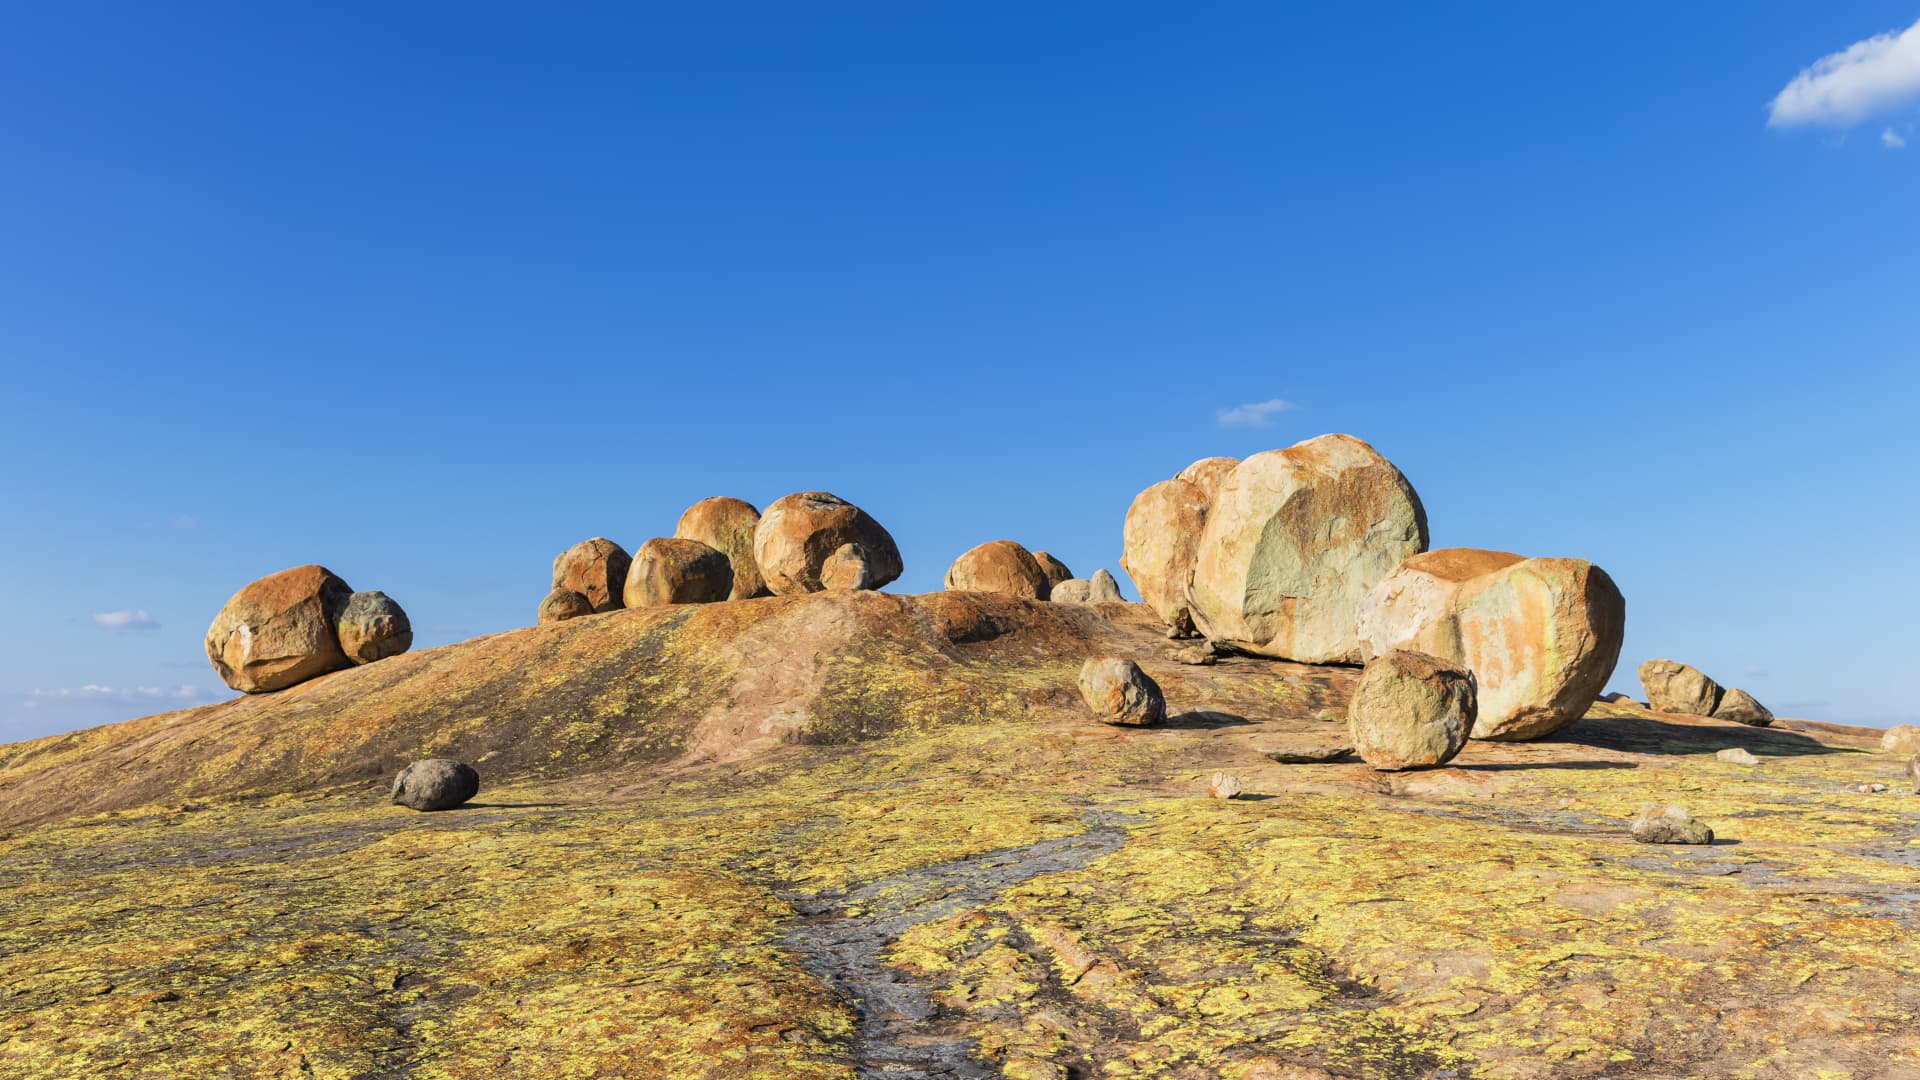 The rock formation in Matobo National Park in Zimbabwe, Africa, which is home to the grave of Cecil Rhodes.